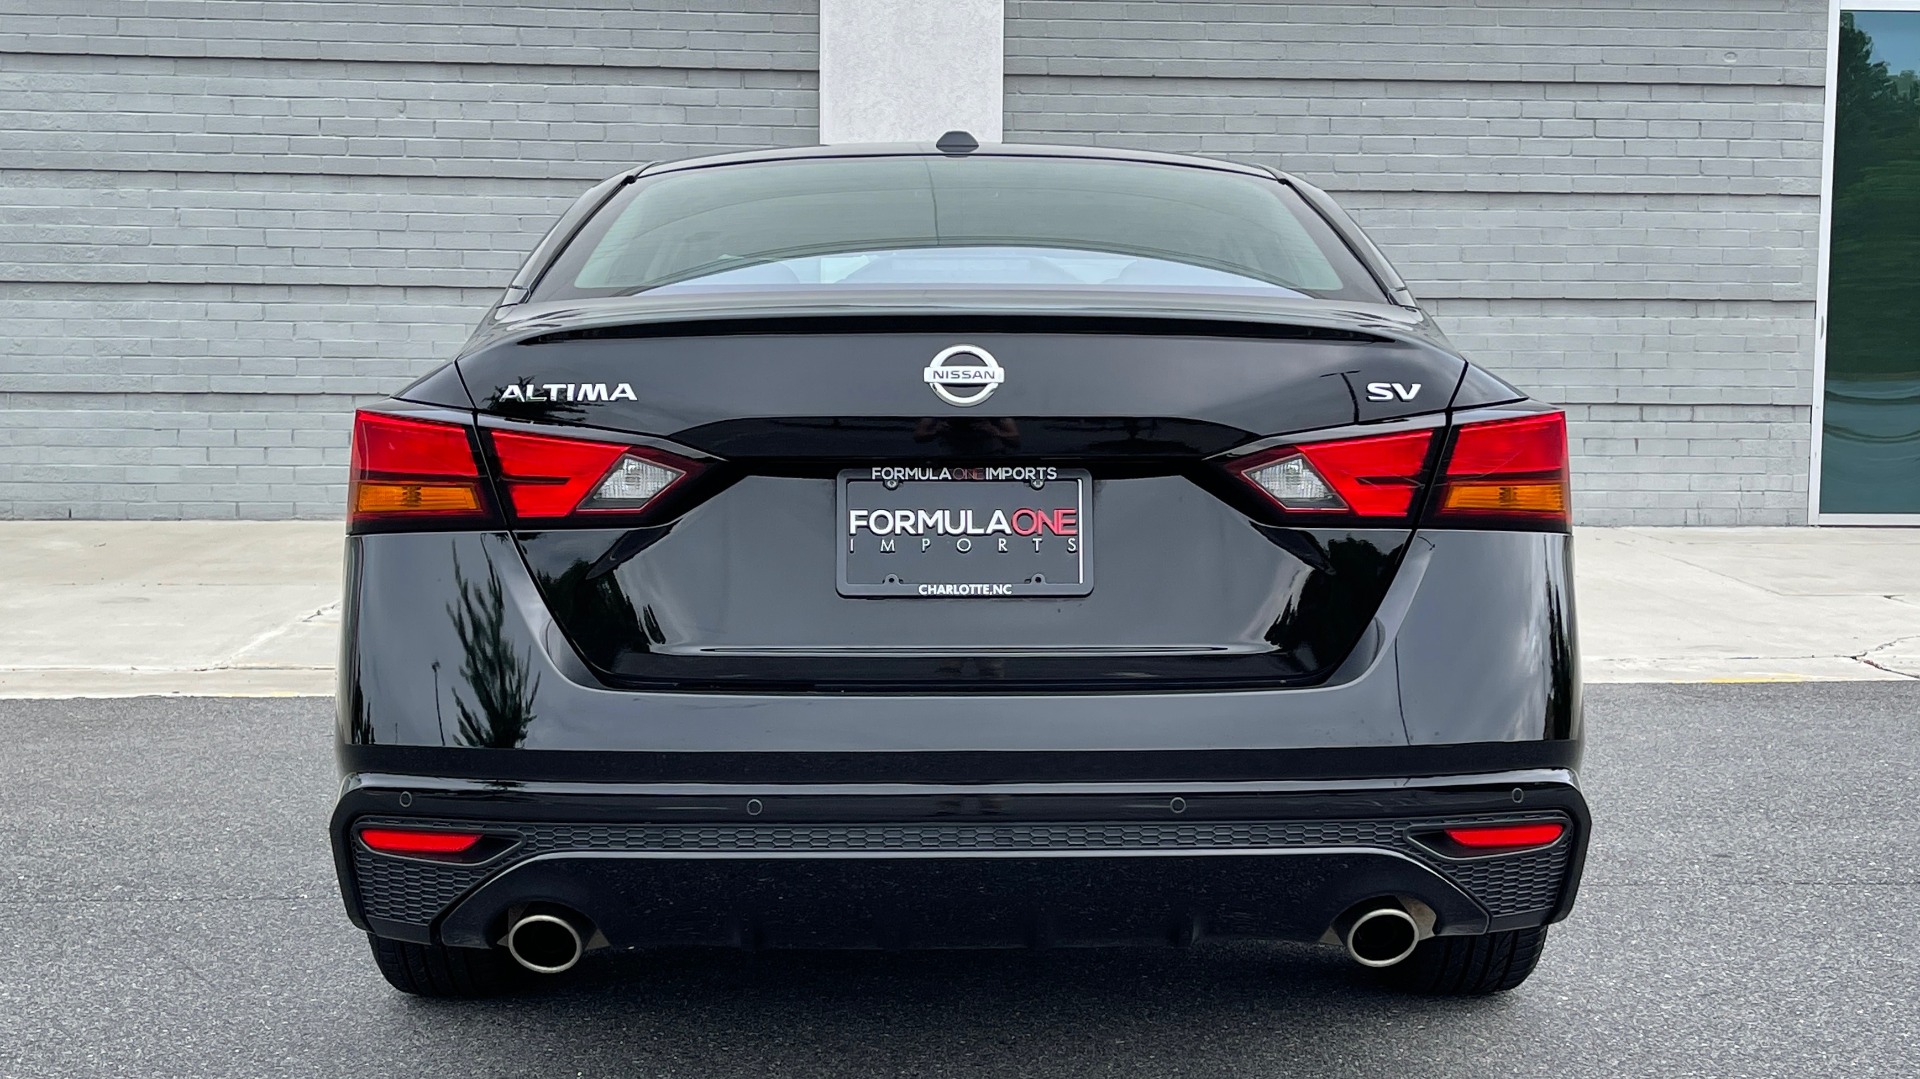 Used 2019 Nissan ALTIMA 2.5 SV SEDAN / CVT TRANS / SUNROOF / REARVIEW / LOW MILES for sale Sold at Formula Imports in Charlotte NC 28227 9